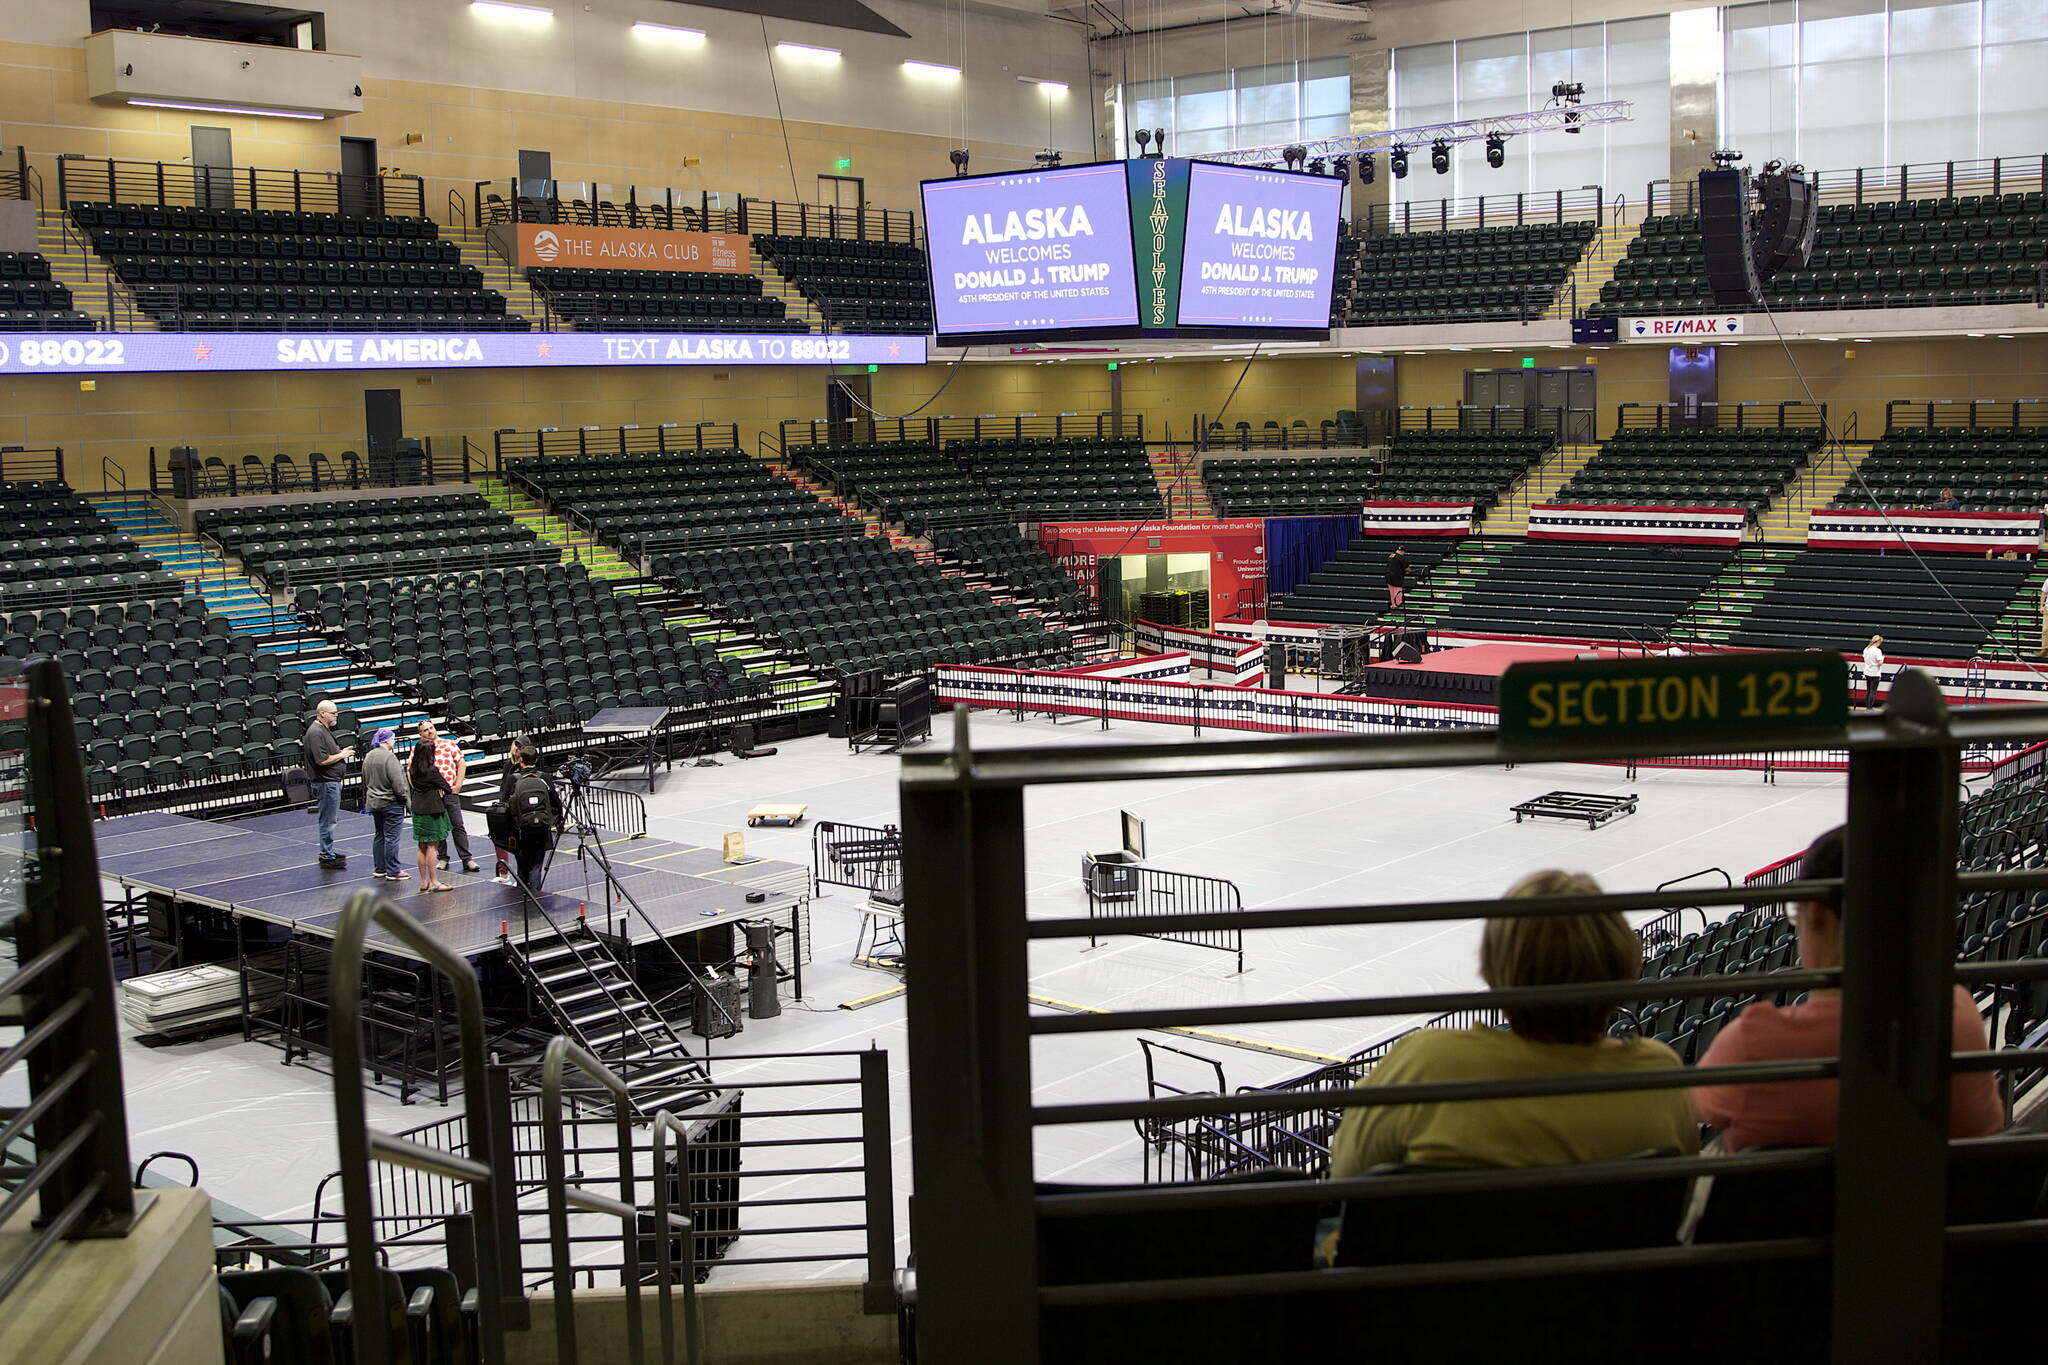 A couple of visitors watch preparations Friday afternoon for the Save America Rally scheduled Saturday at the Alaska Airlines Center in Anchorage. (Mark Sabbatini / Juneau Empire)